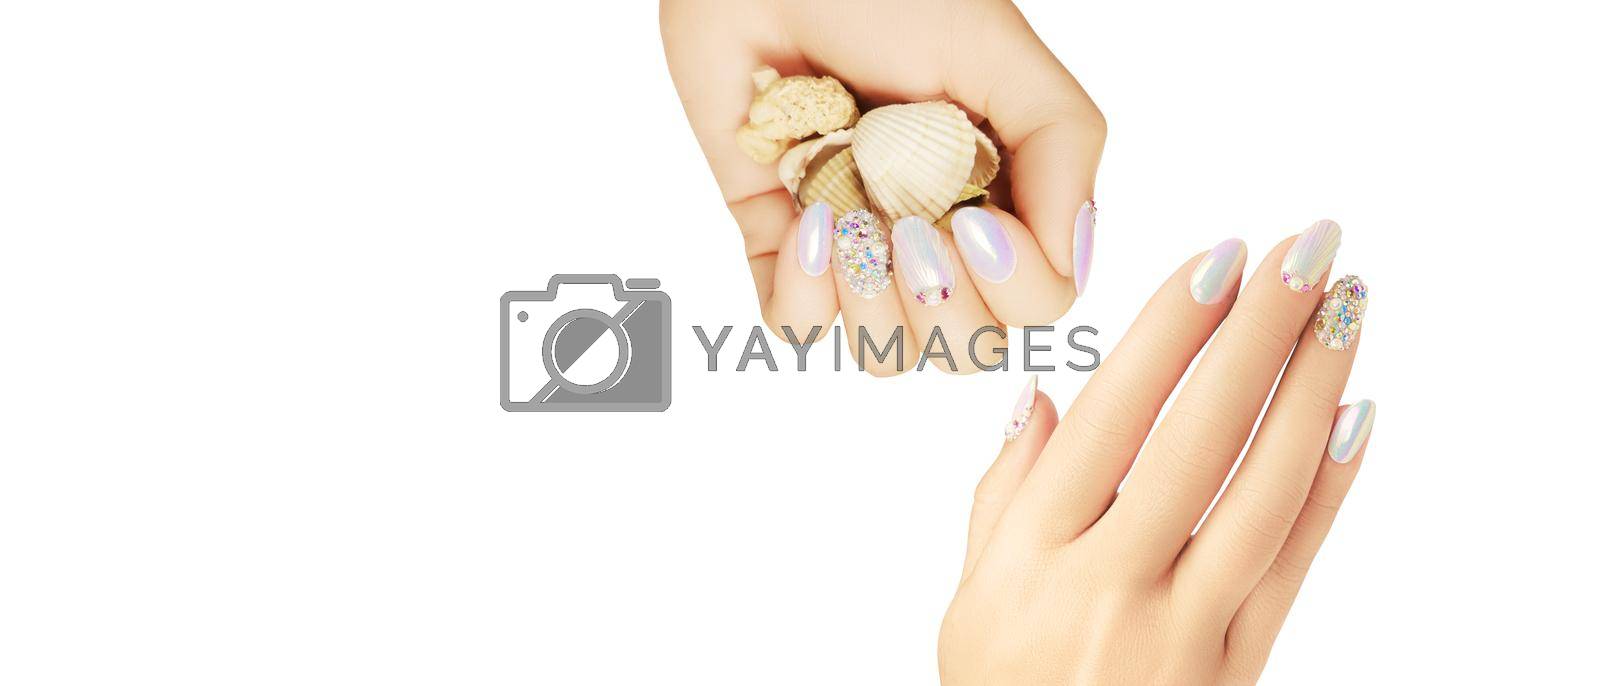 Royalty free image of Summer fashion and beauty hand care concept with seashells by Taut